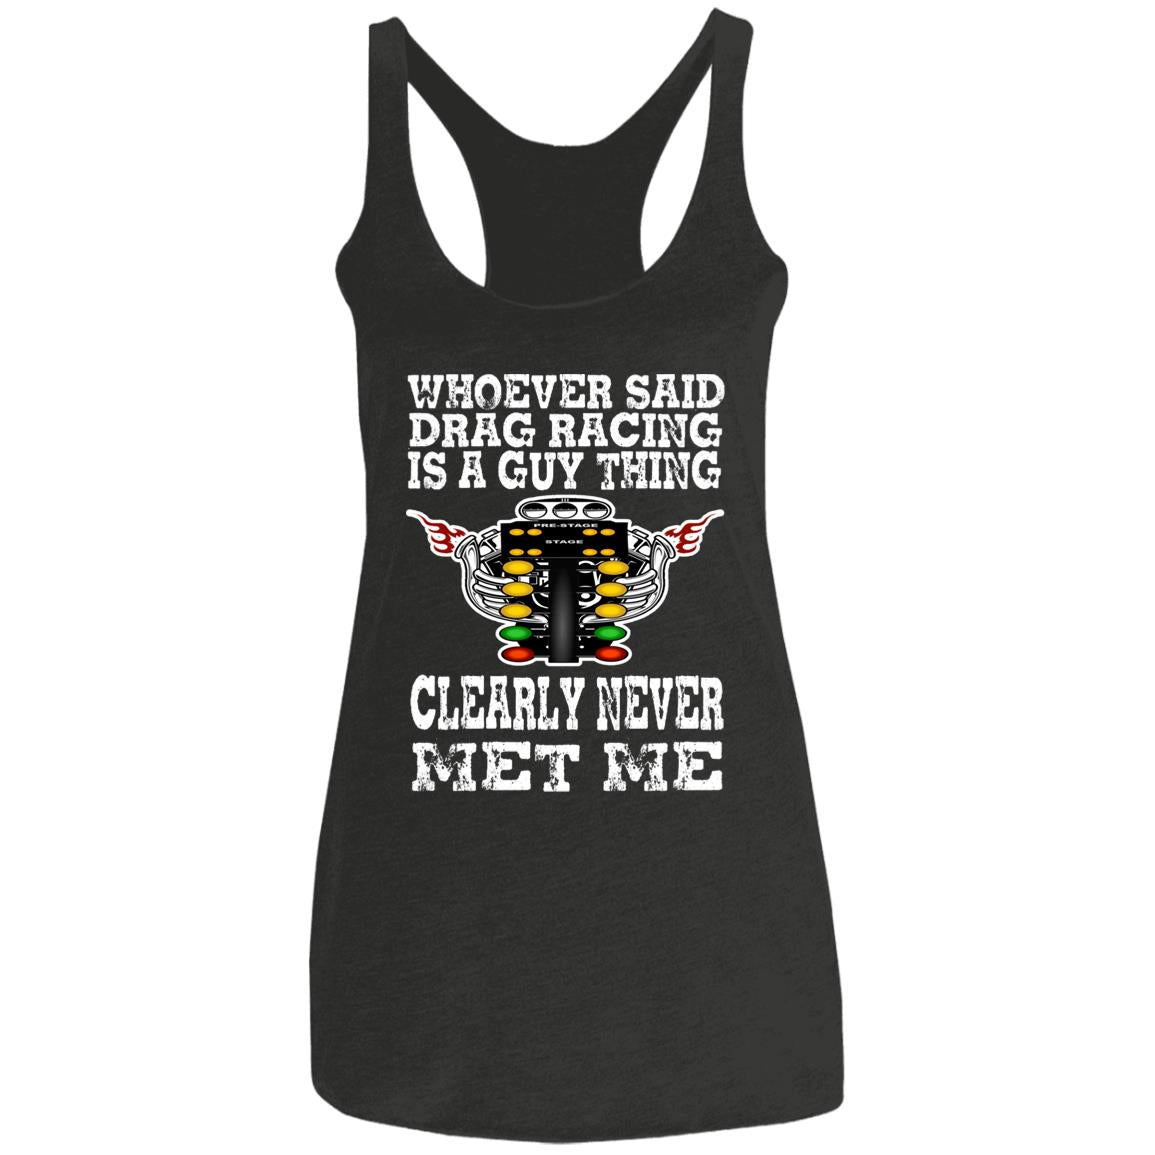 Whoever Said Drag Racing Is A Guy Thing Ladies' Triblend Racerback Tank